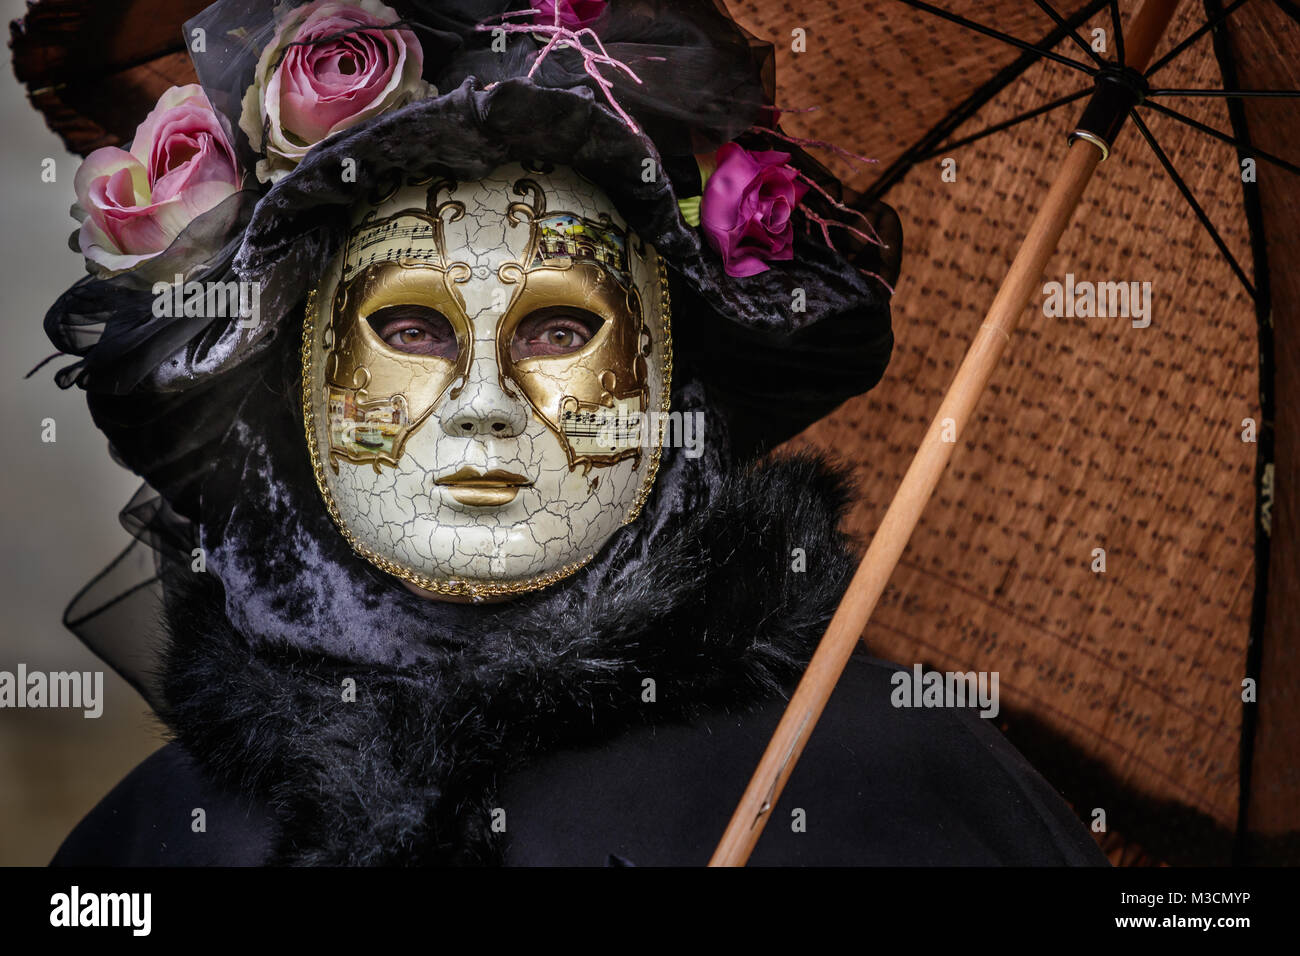 Schwäbisch Hall, Germany - February 4, 2018: Portrait of an unidentified participant dressed up in venetian style renaissance costume and mask at the  Stock Photo